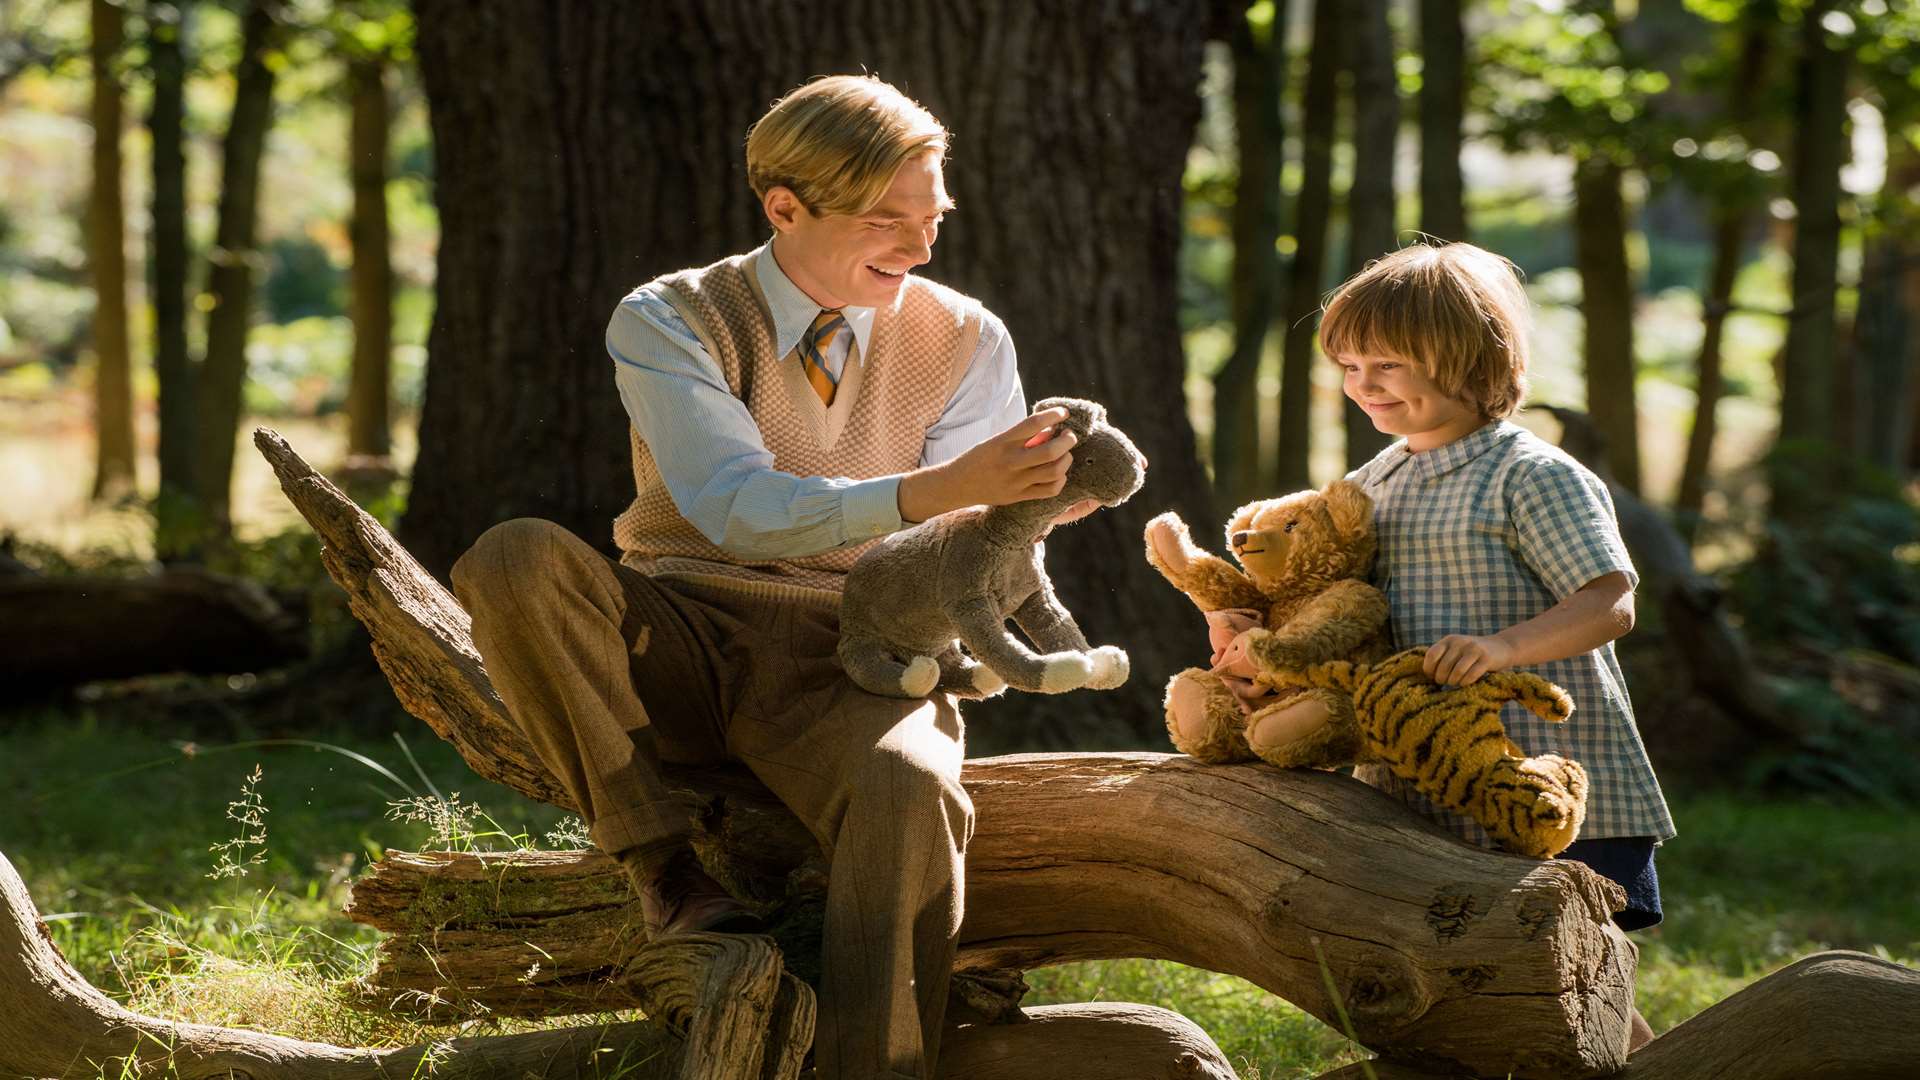 A scene from the film Goodbye Christopher Robin